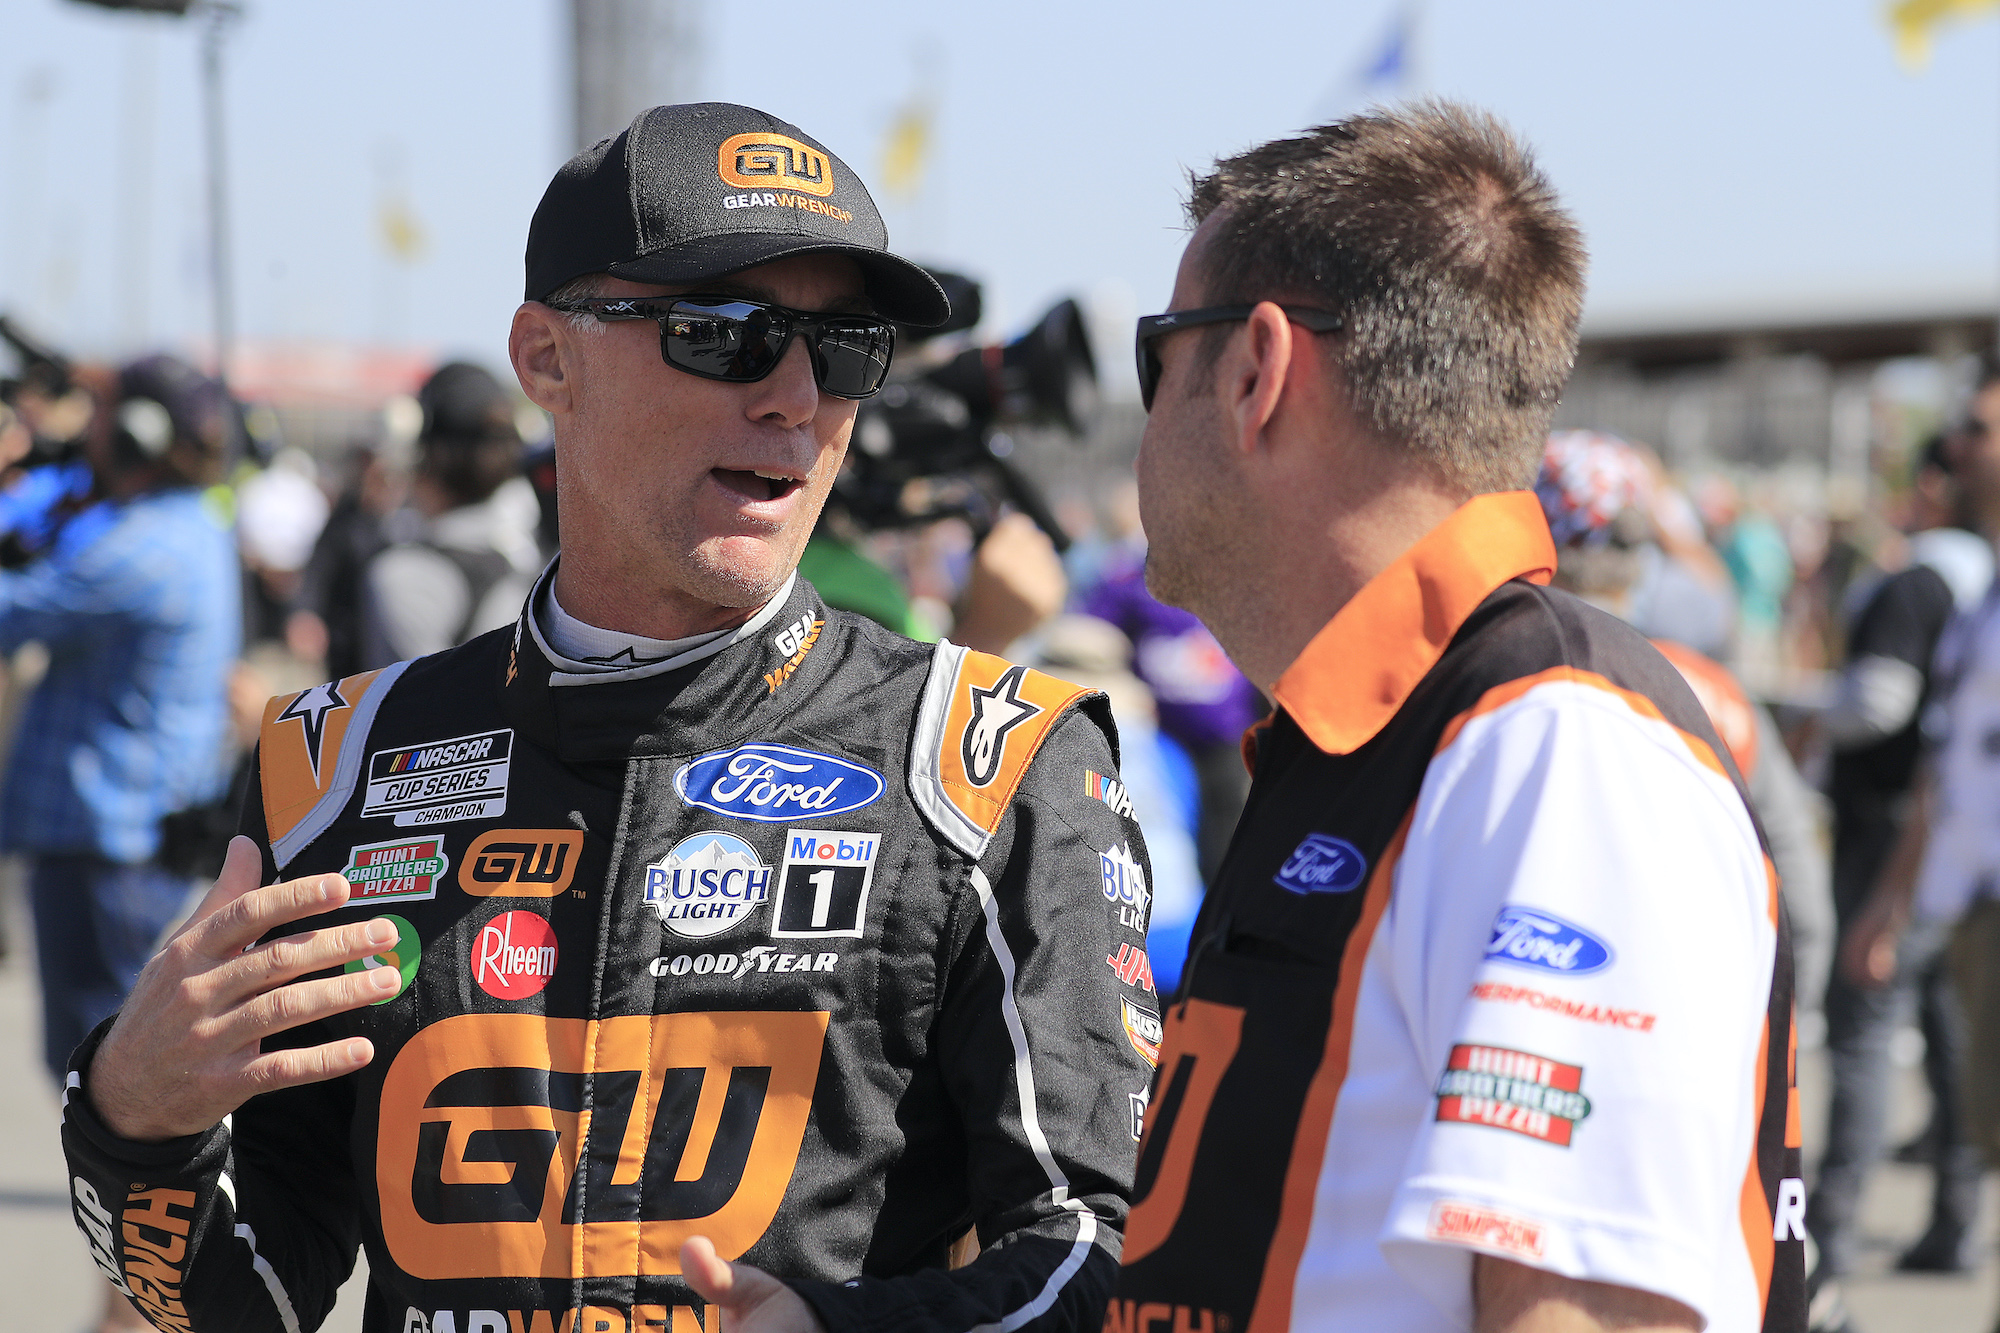 Kevin Harvick and Crew Chief Rodney Childers Waste No Time Sharing What They Think About NASCAR’s Major Penalty